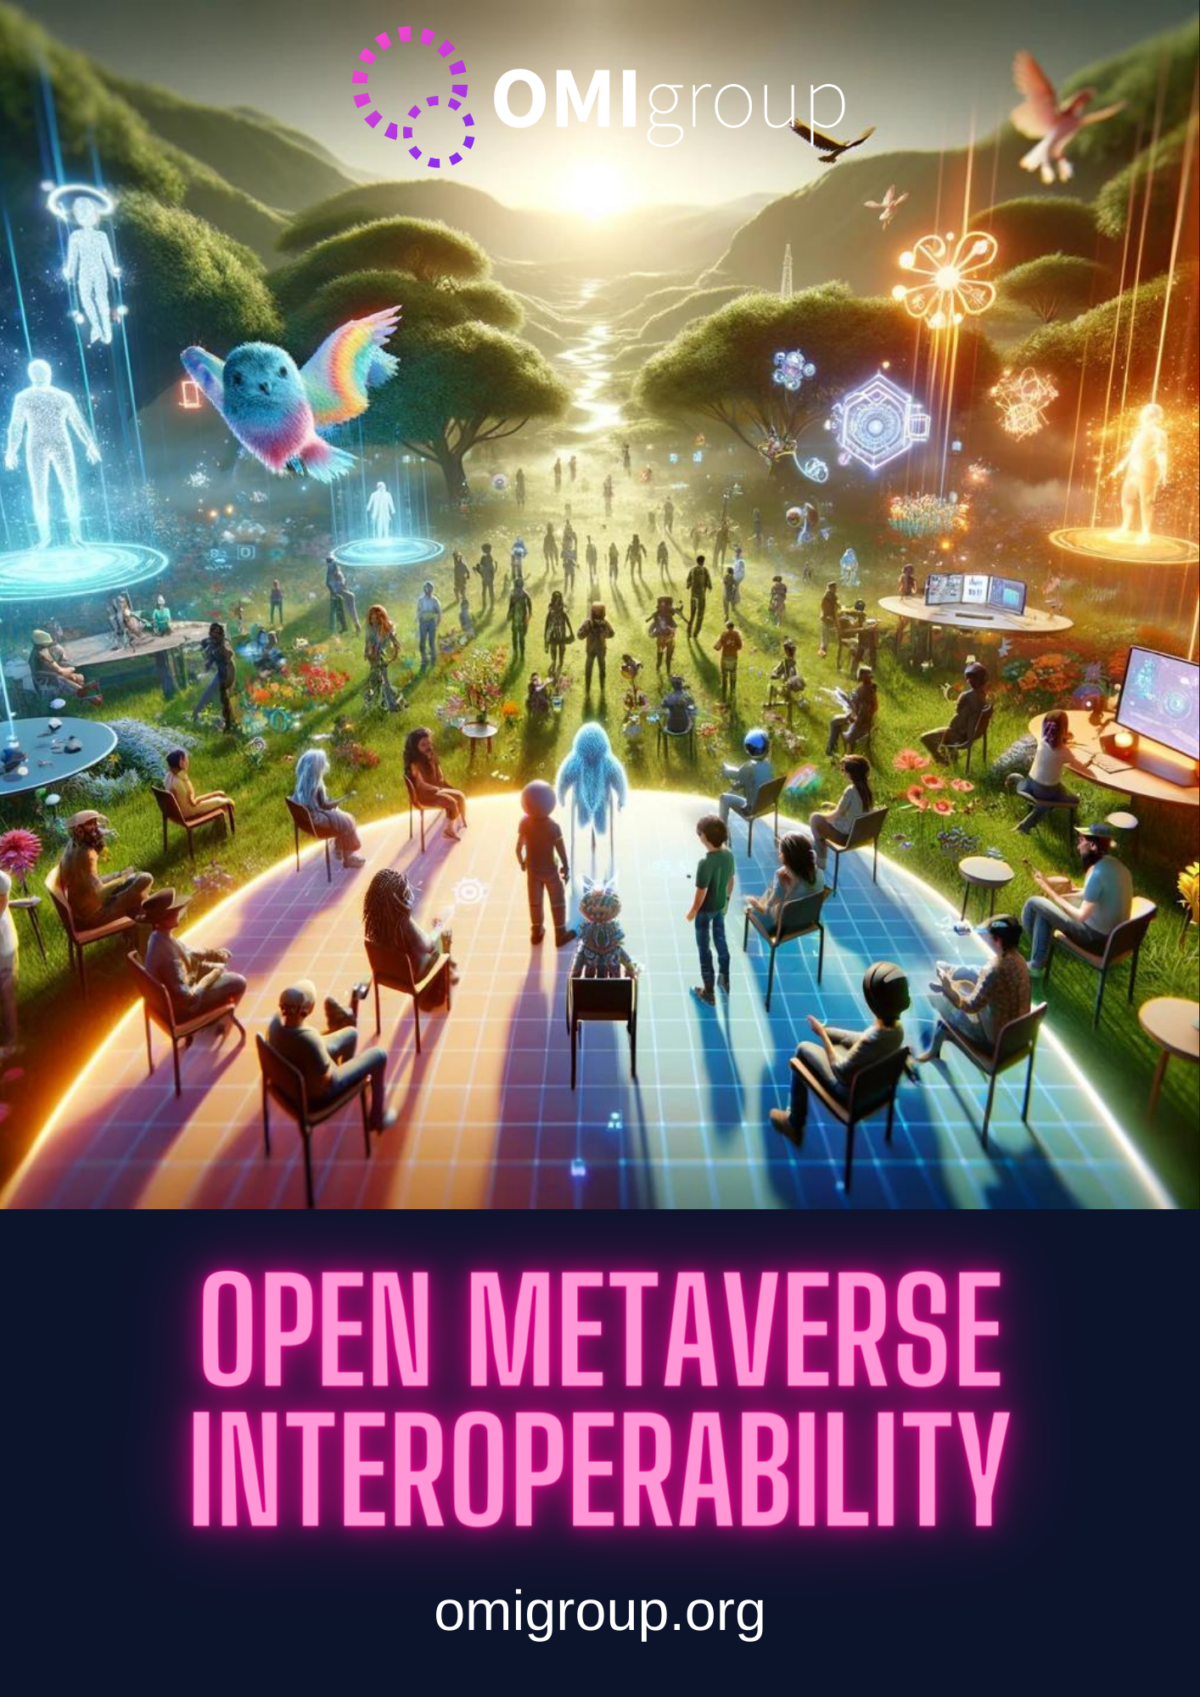 cover image for OMI blogpost, showing a utopian world